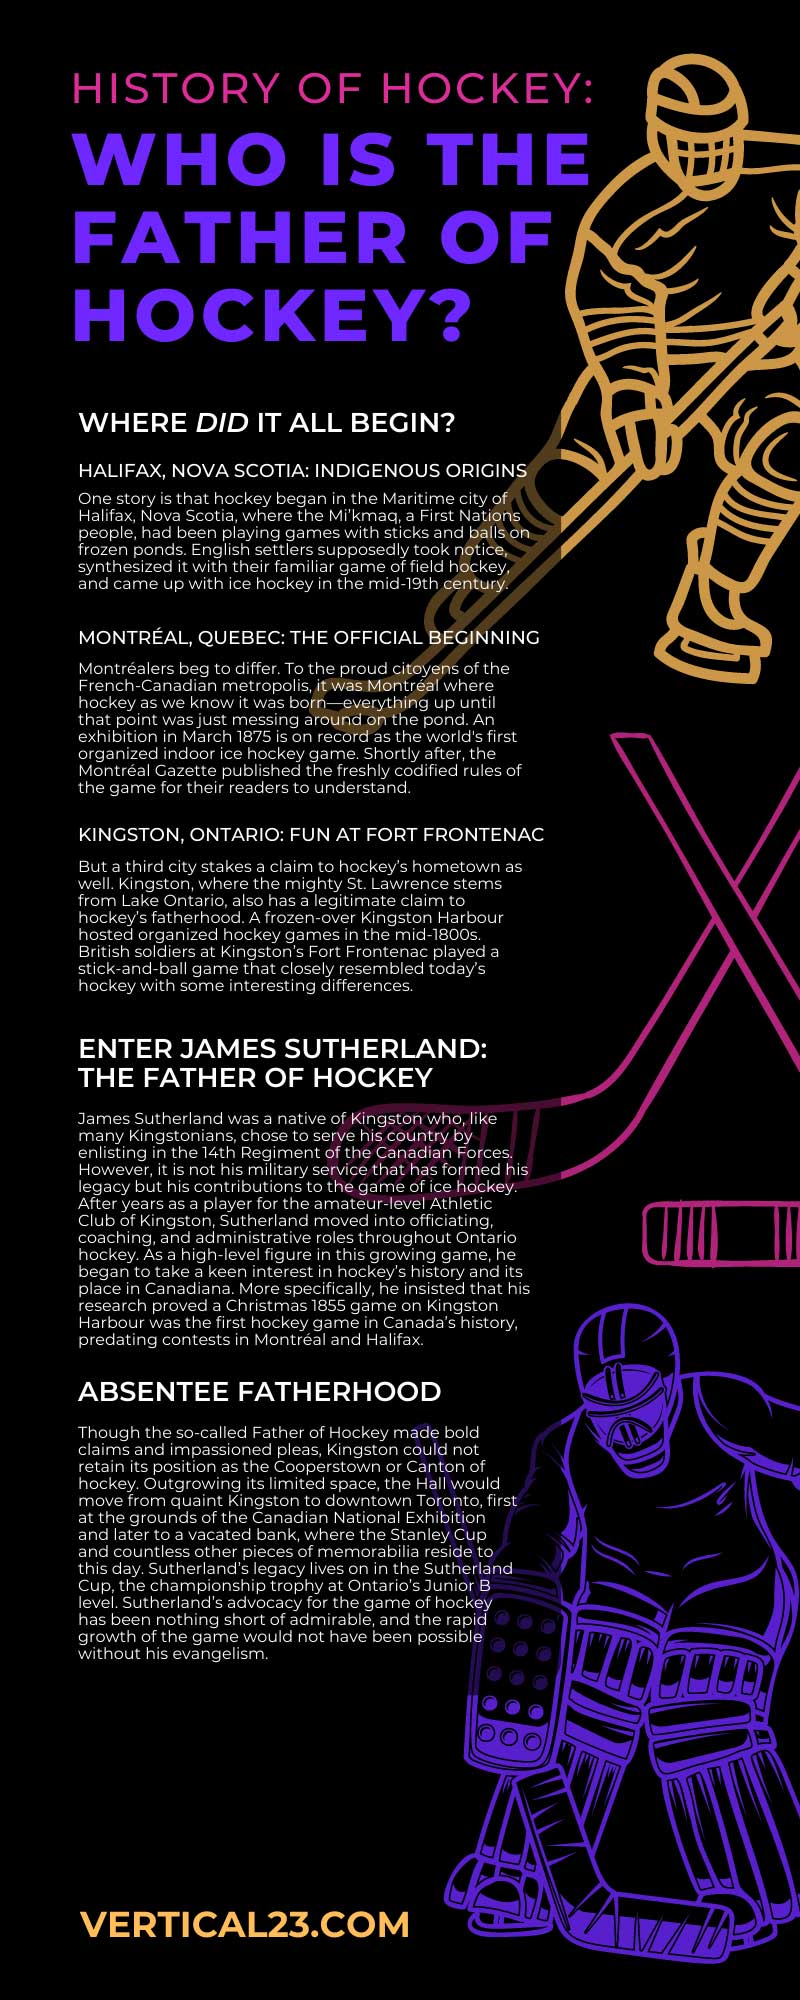 History of Hockey: Who Is the Father of Hockey?